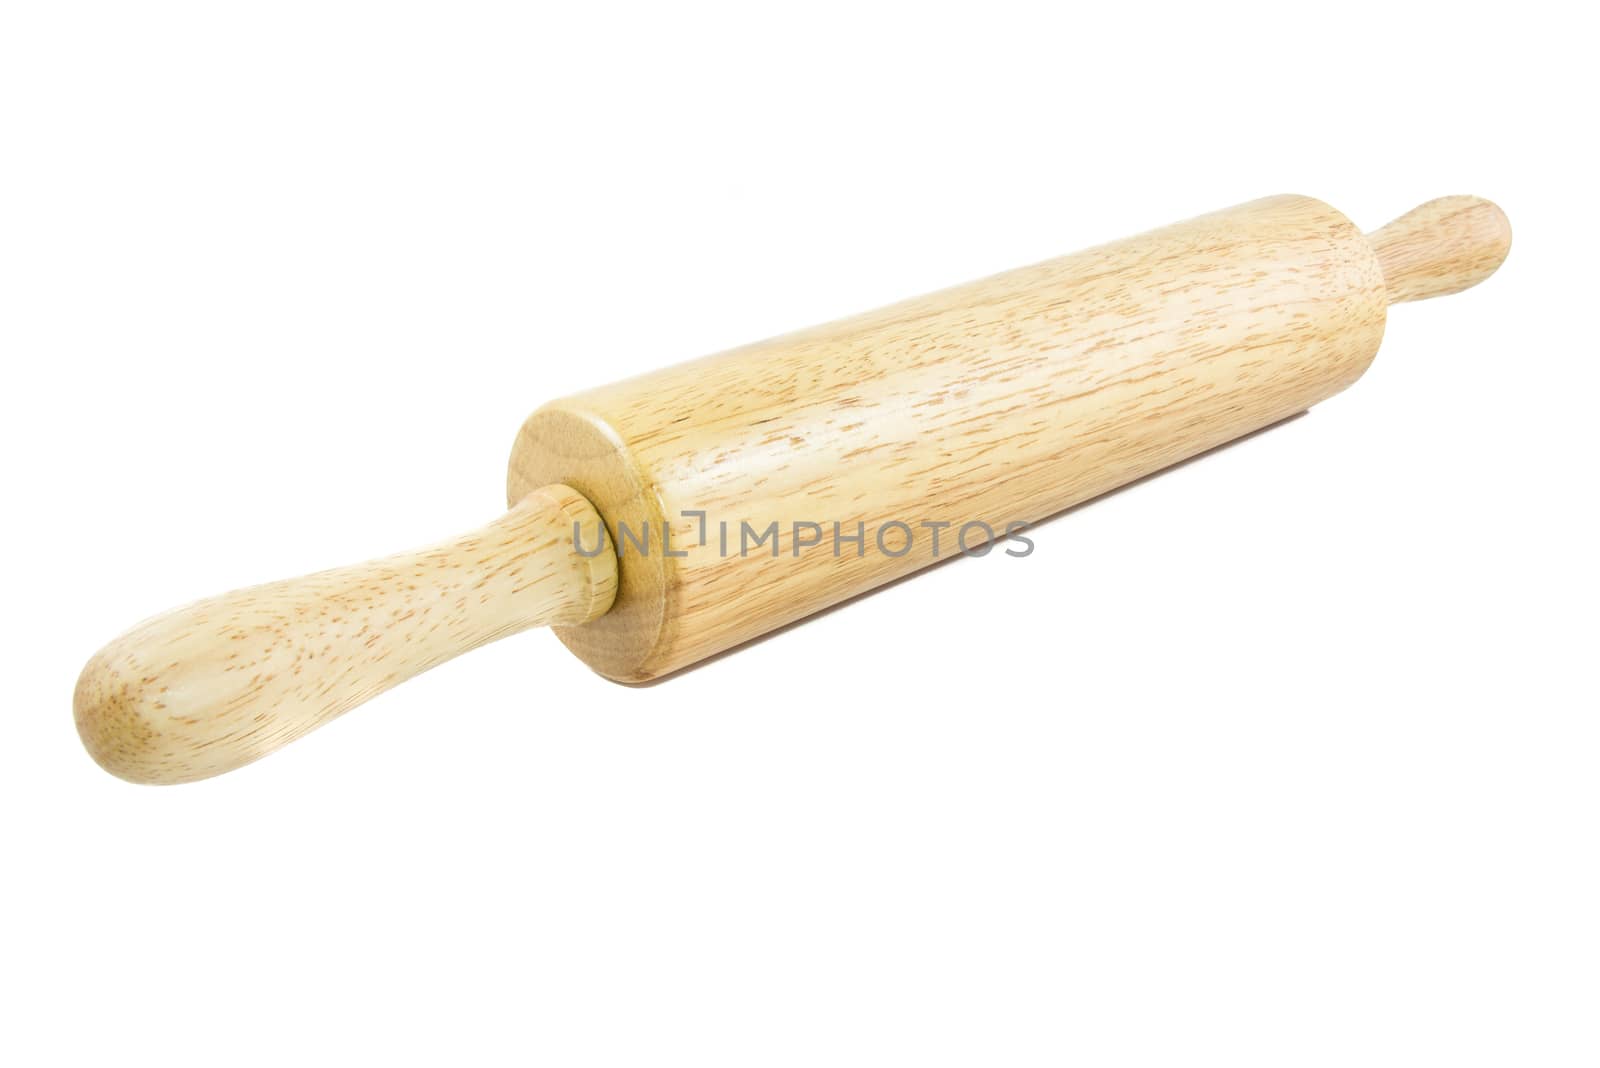 Wooden rolling pin isolated on white background